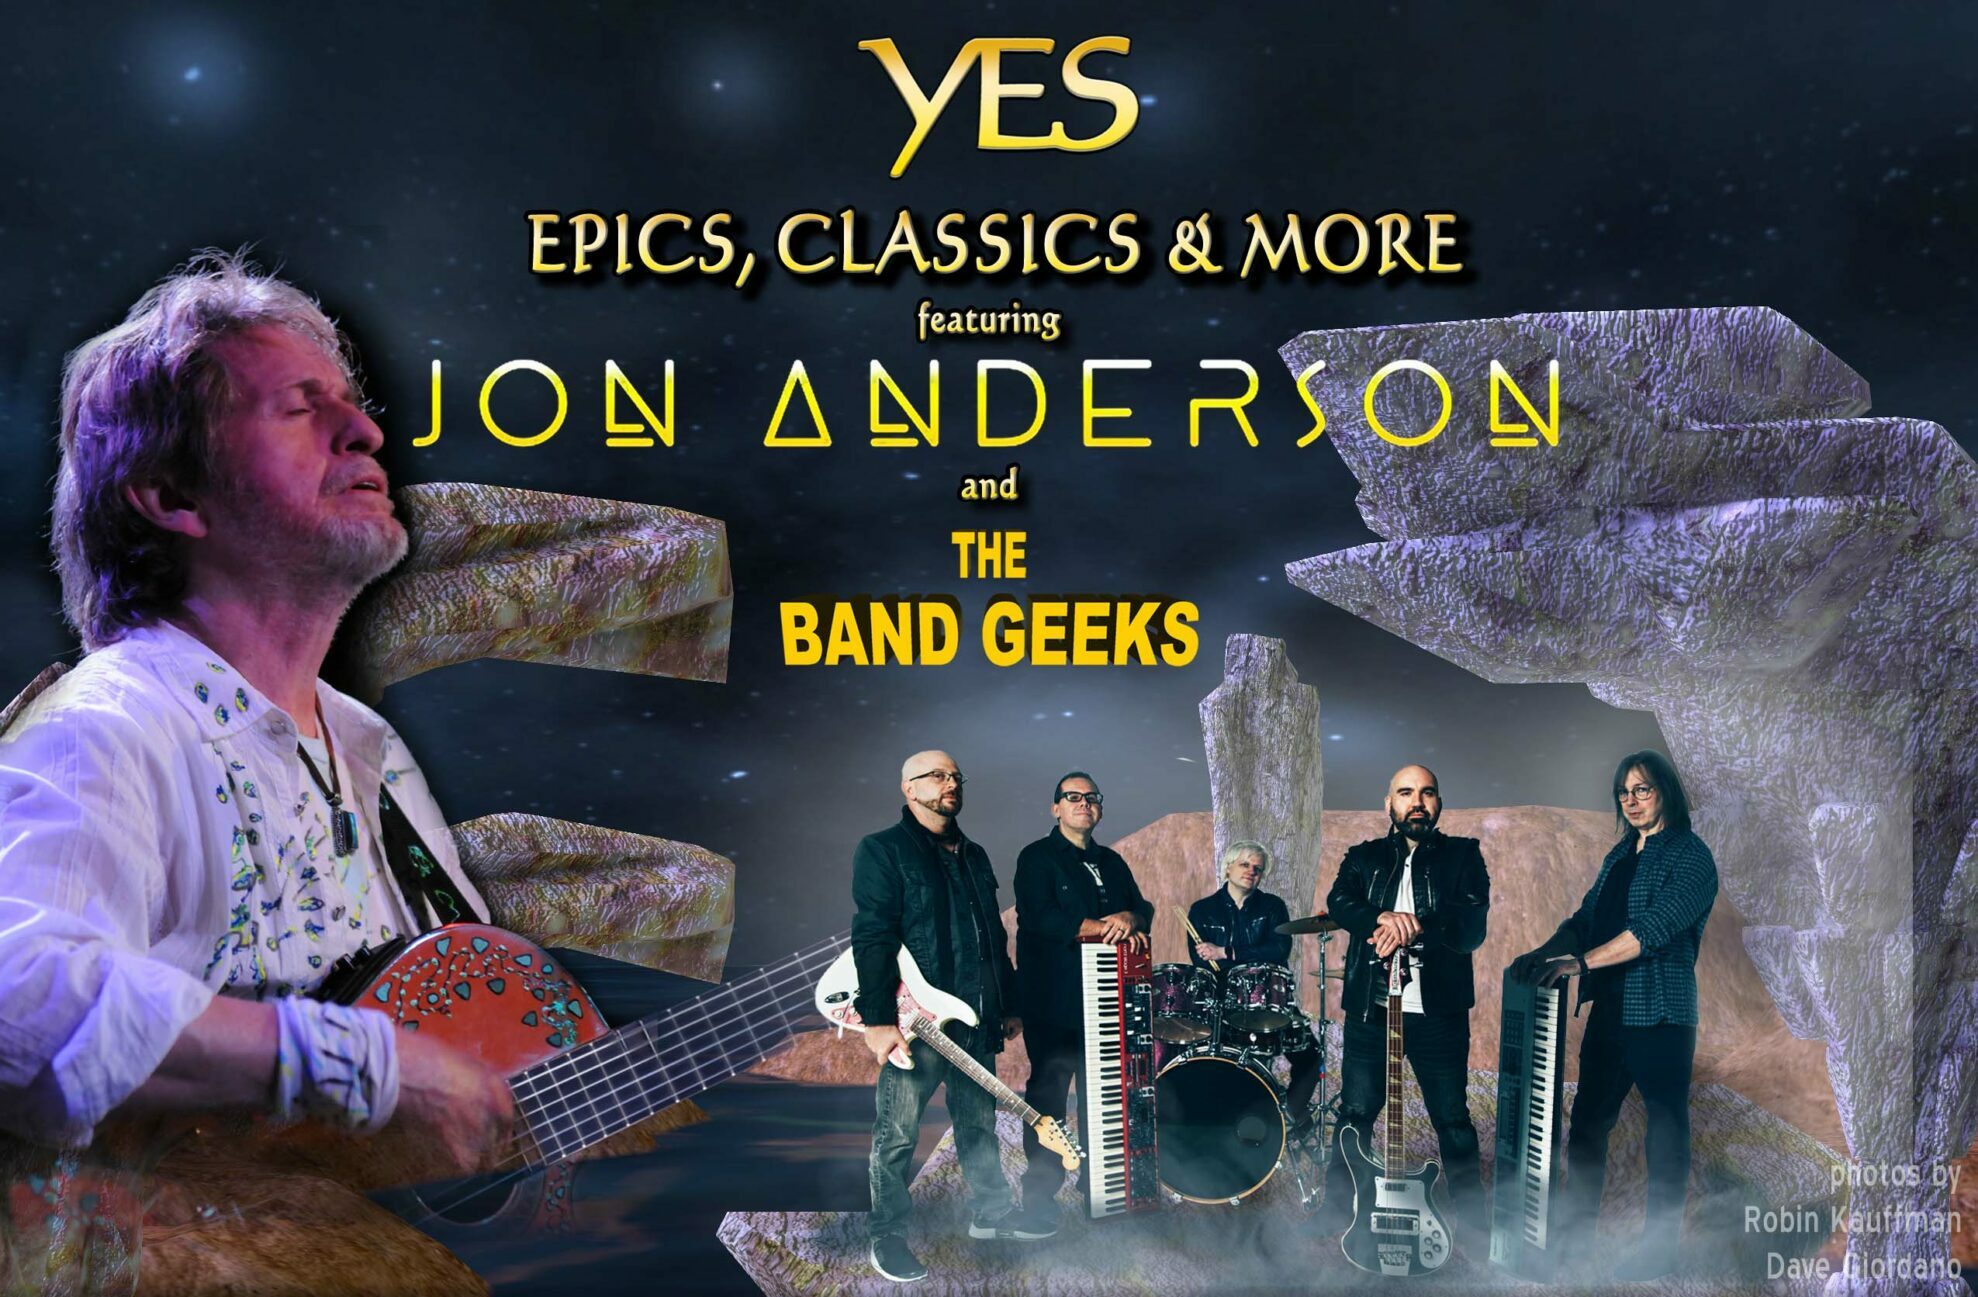 <h1 class="tribe-events-single-event-title">YES Epics & Classics featuring Jon Anderson + The Return of Emerson, Lake, and Palmer</h1>